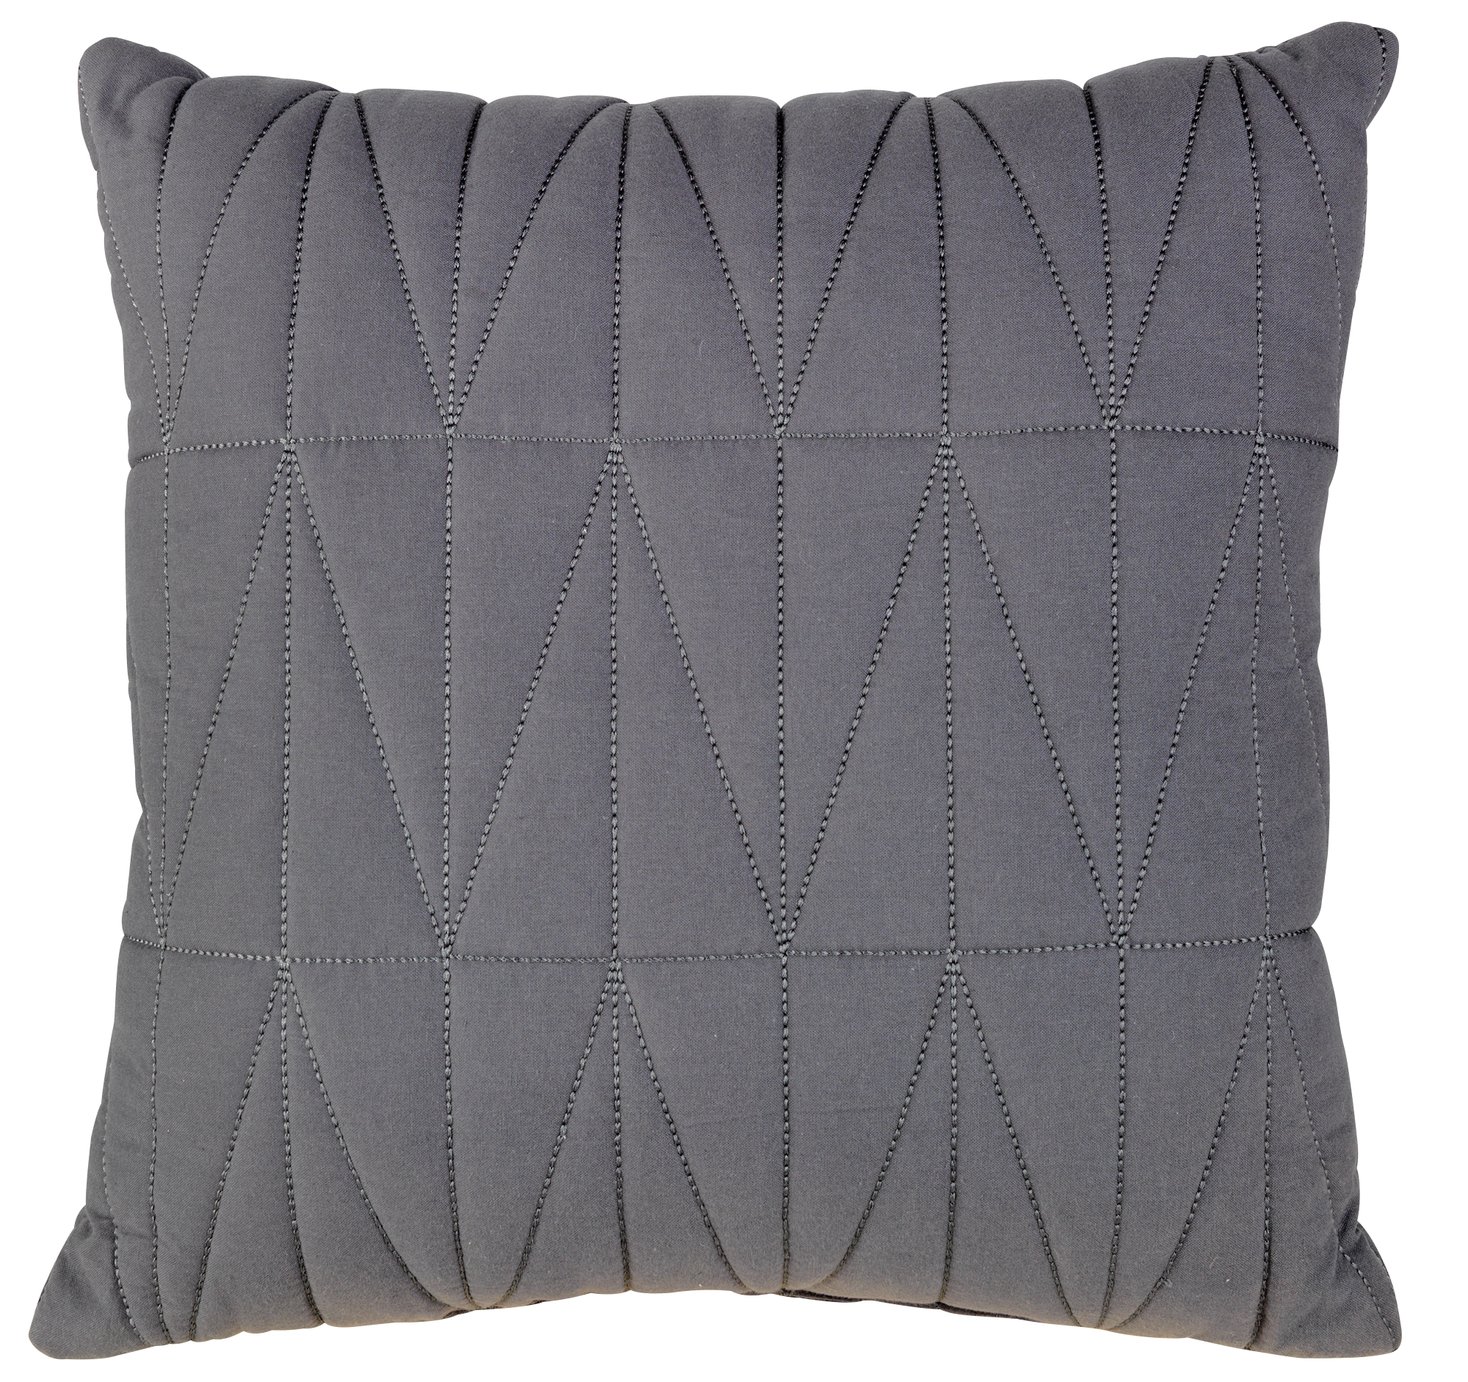 Argos Home Stockholm Outdoor Quilted Cushion review